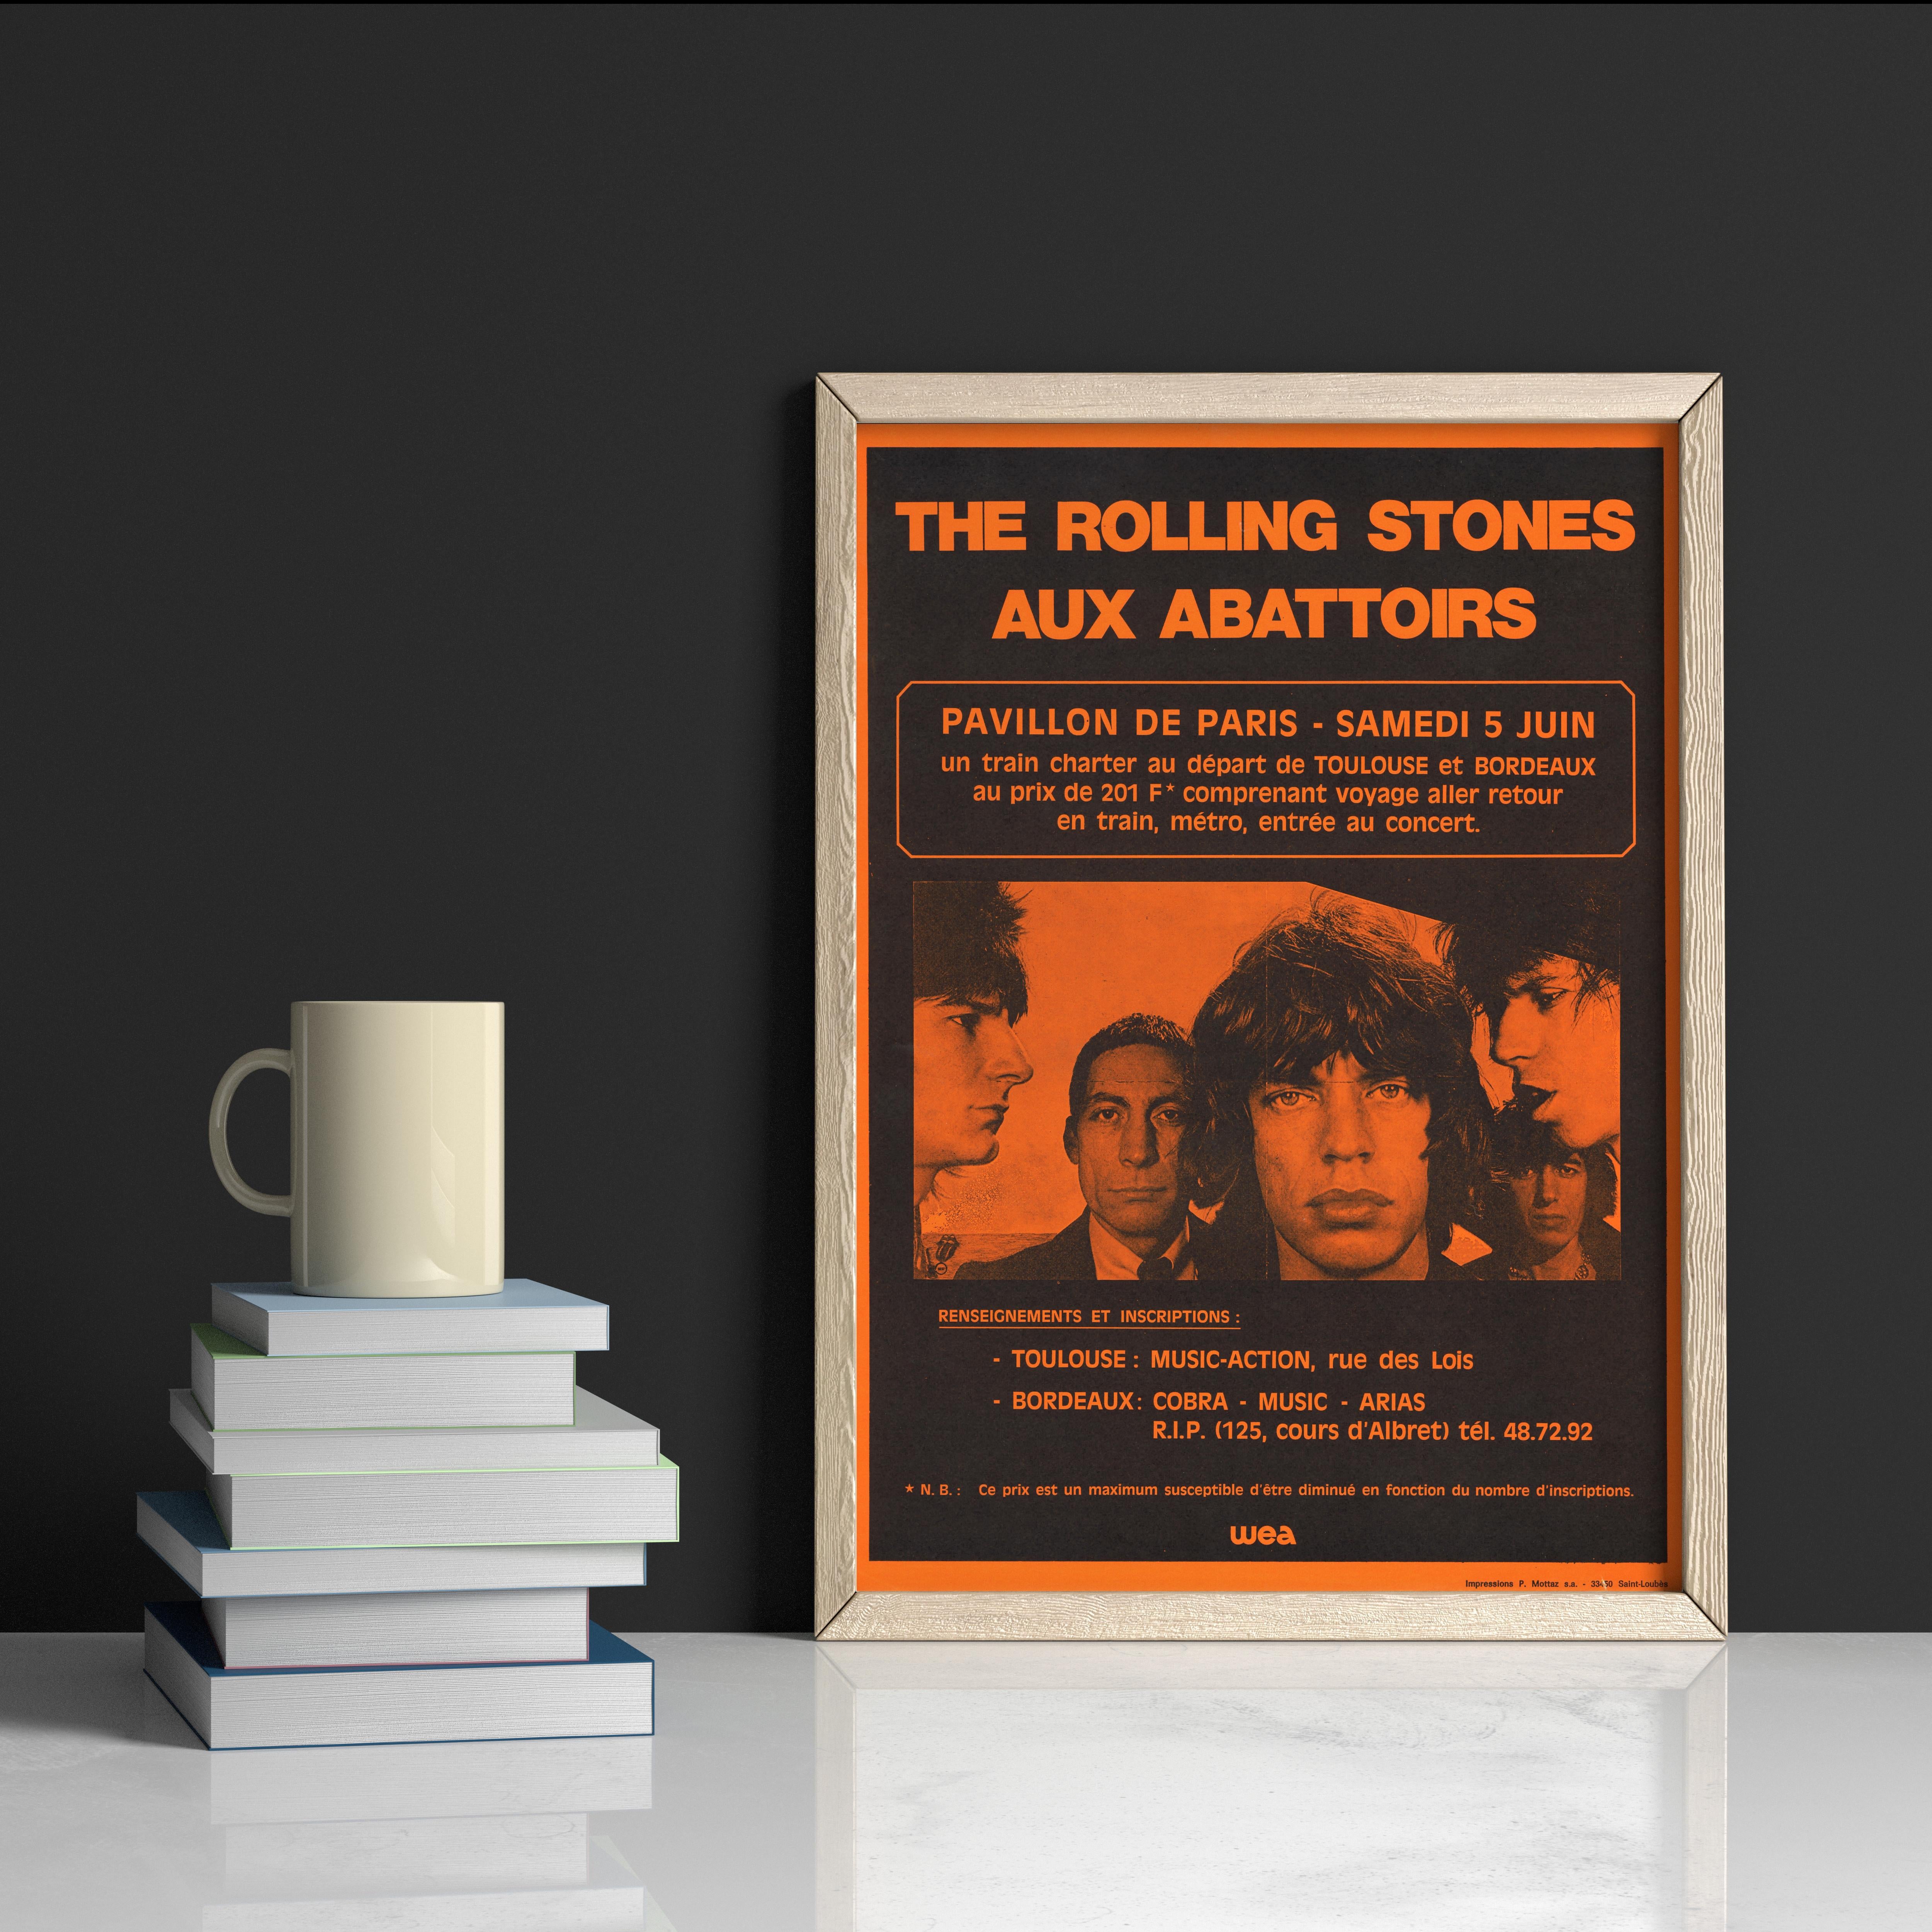 A French concert poster for a performance by the Rolling Stones at Les Abattoirs, Pavillon de Paris, on Saturday 5th June 1976 during their Tour of Europe 1976 in support of the album 'Black and Blue.' Mick Jagger told the Old Grey Whistle Test that